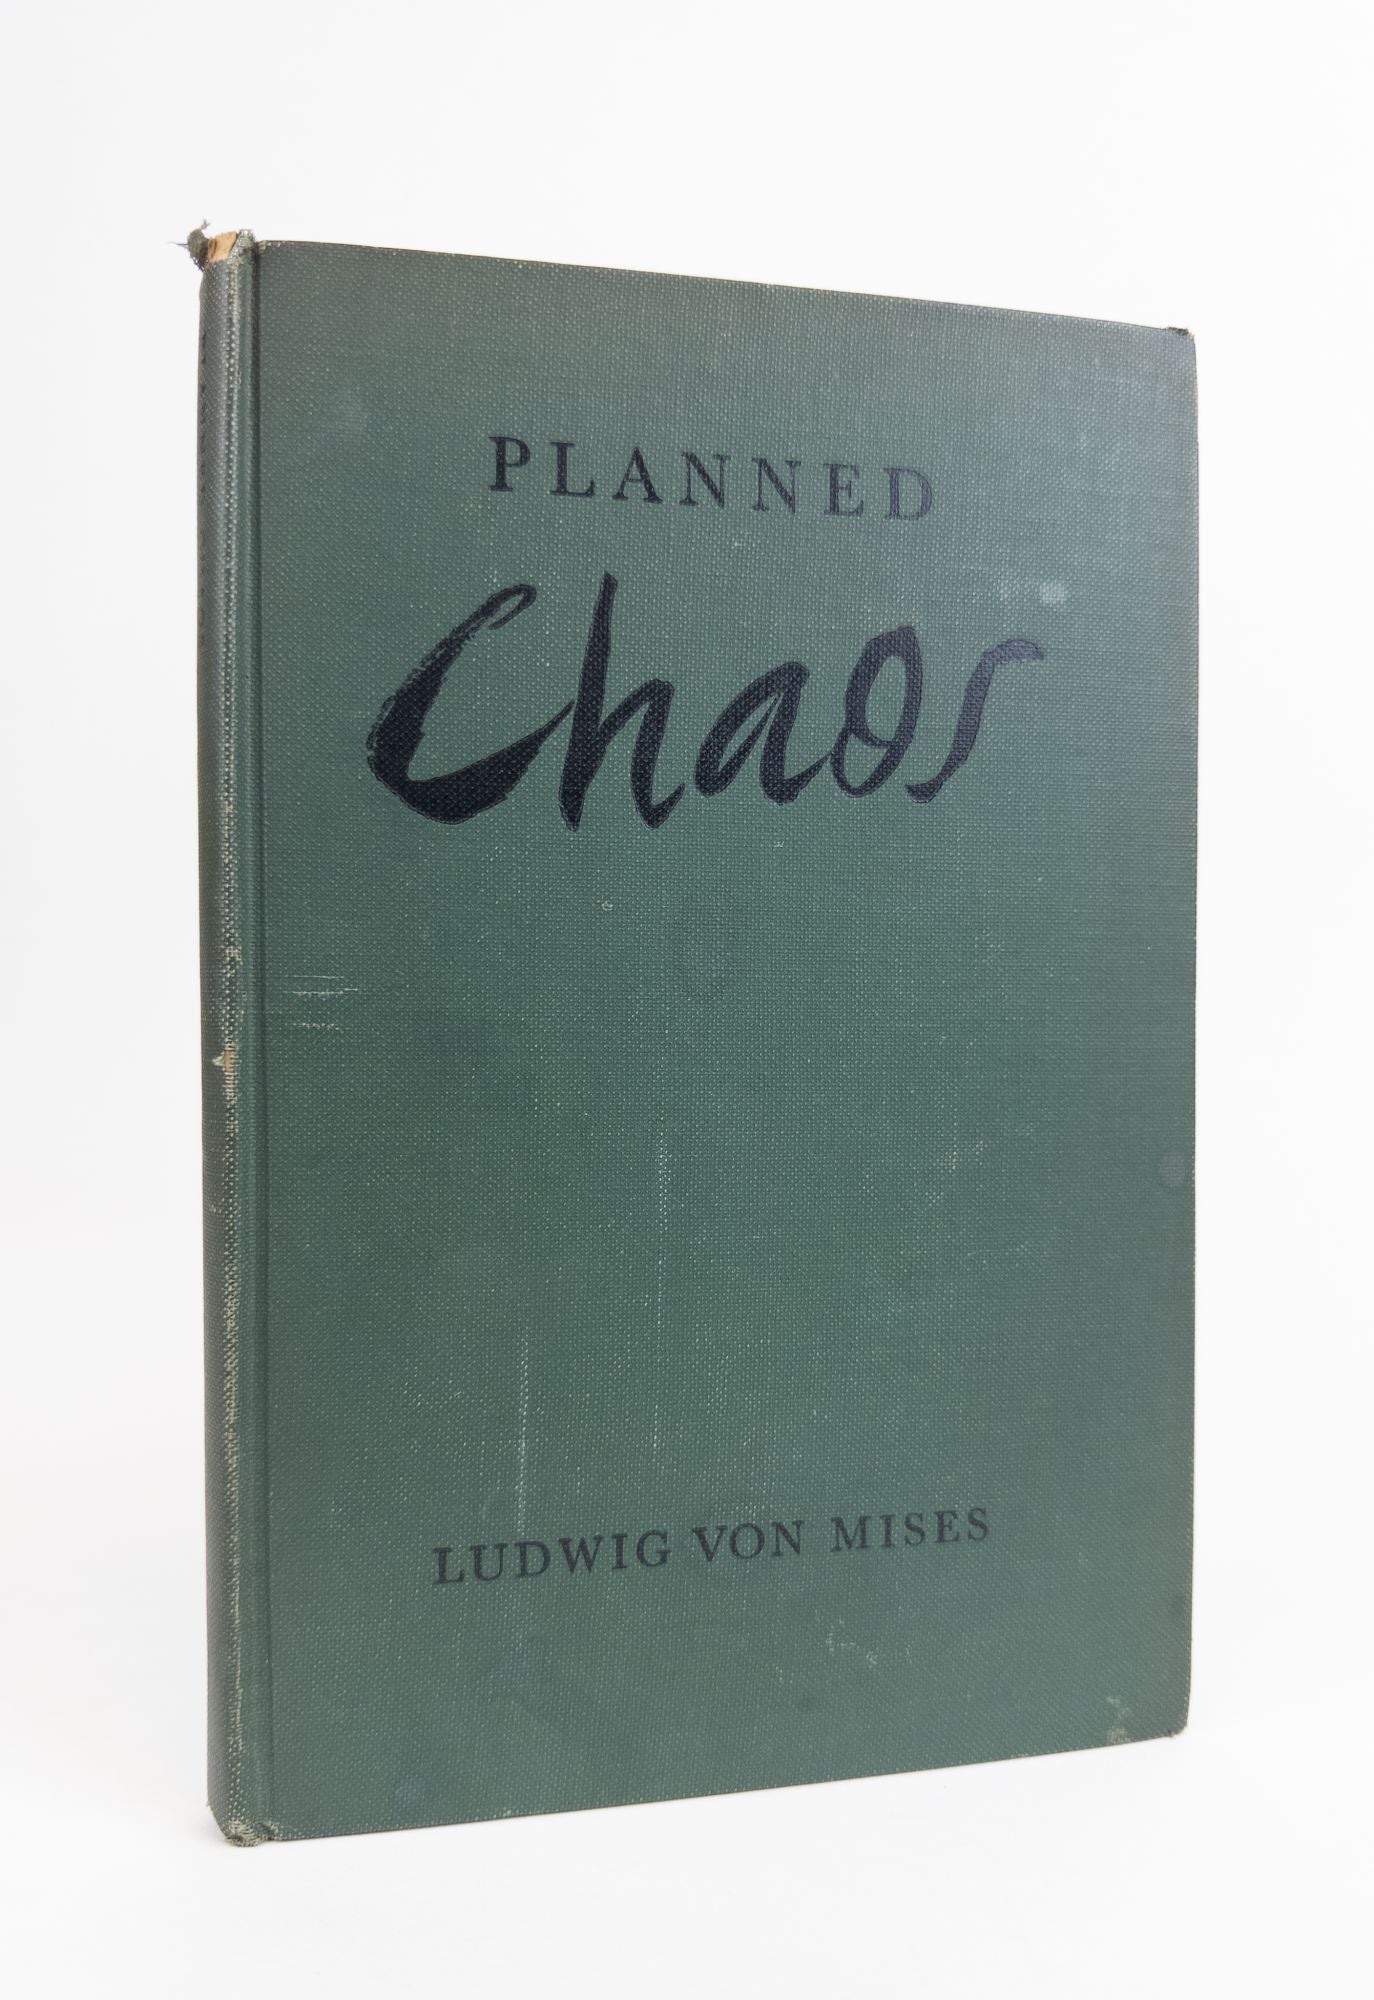 Product Image for PLANNED CHAOS